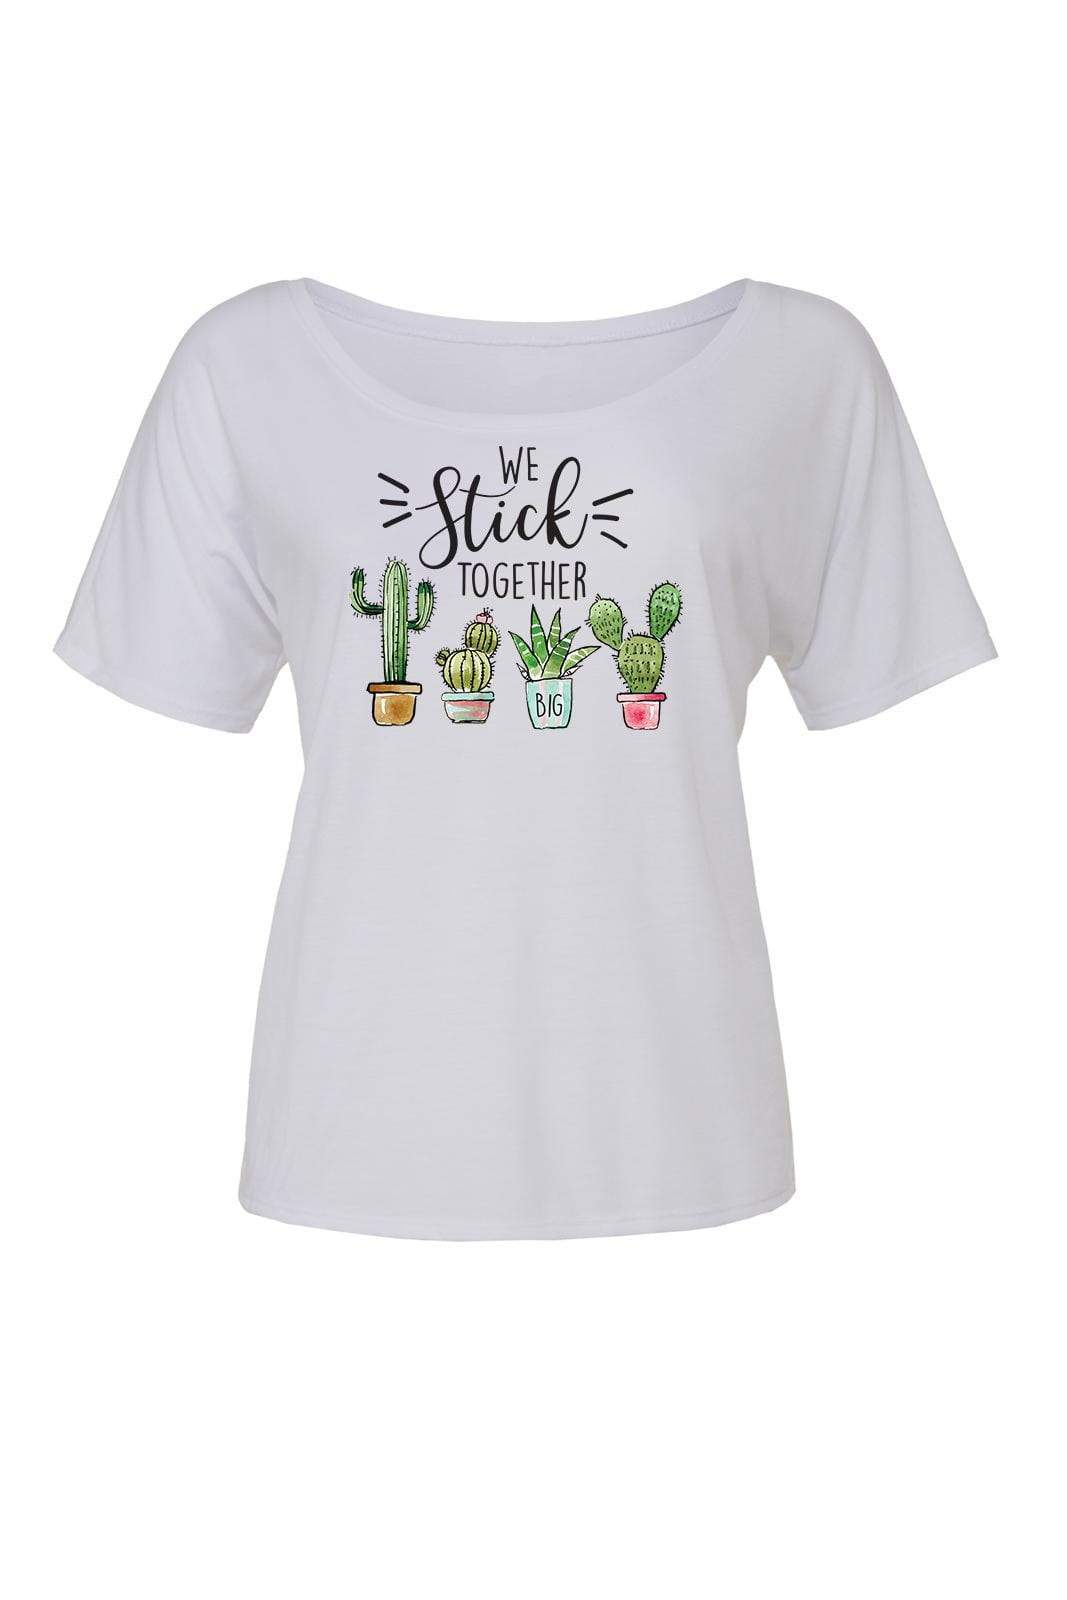 Big Little We Stick Together Shirt - Bella Slouchy Scoop Neck Short Sleeve, Ladies, Sunny and Southern, - Sunny and Southern,